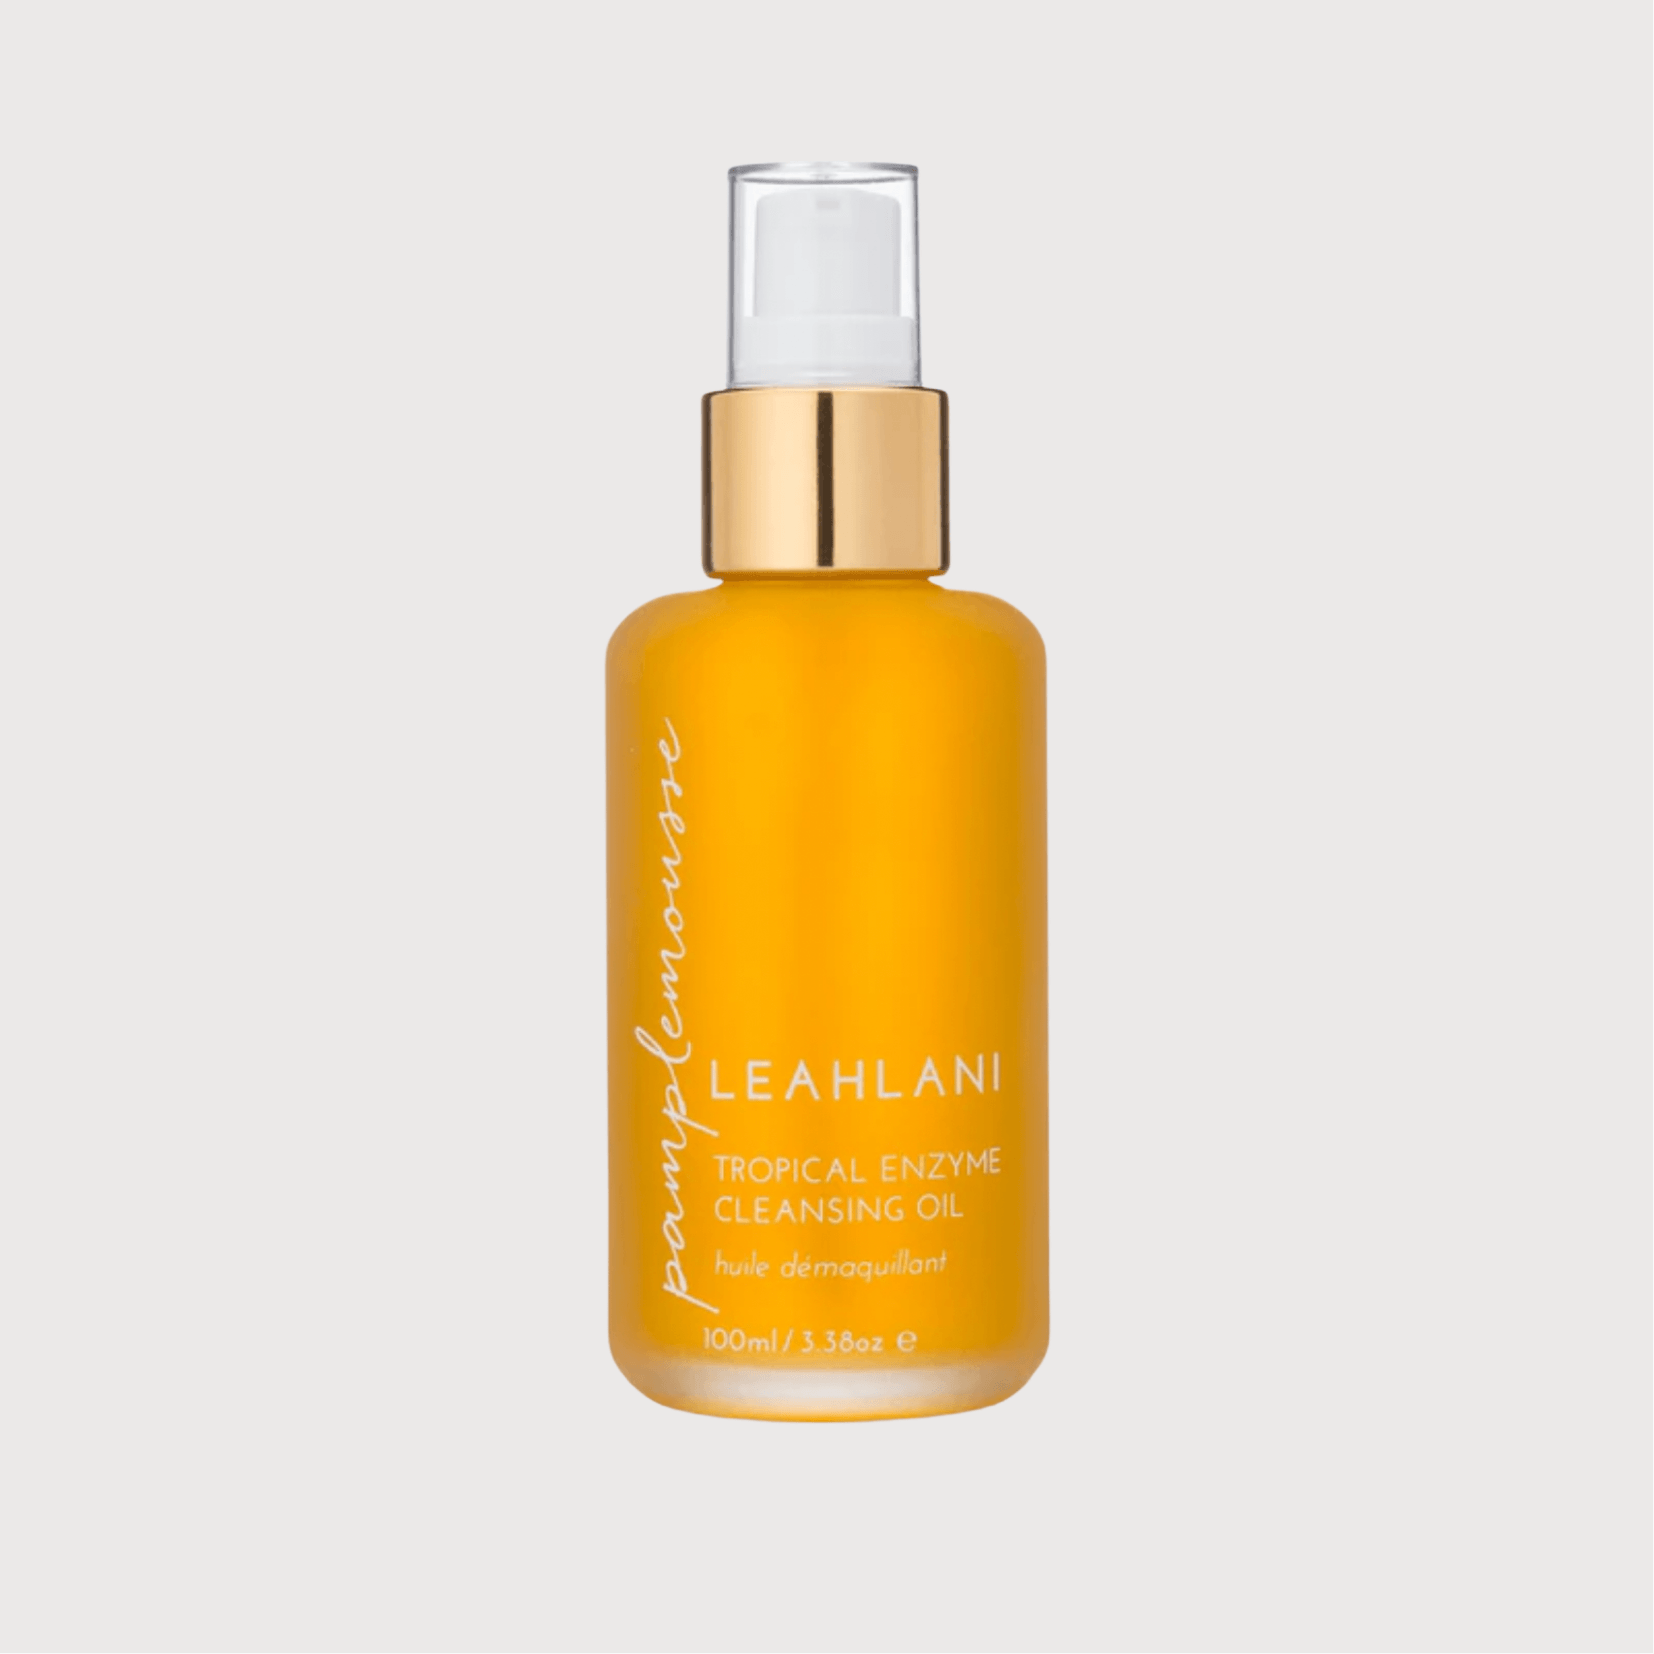 Pamplemousse Cleansing Oil by Leahlani - Haven